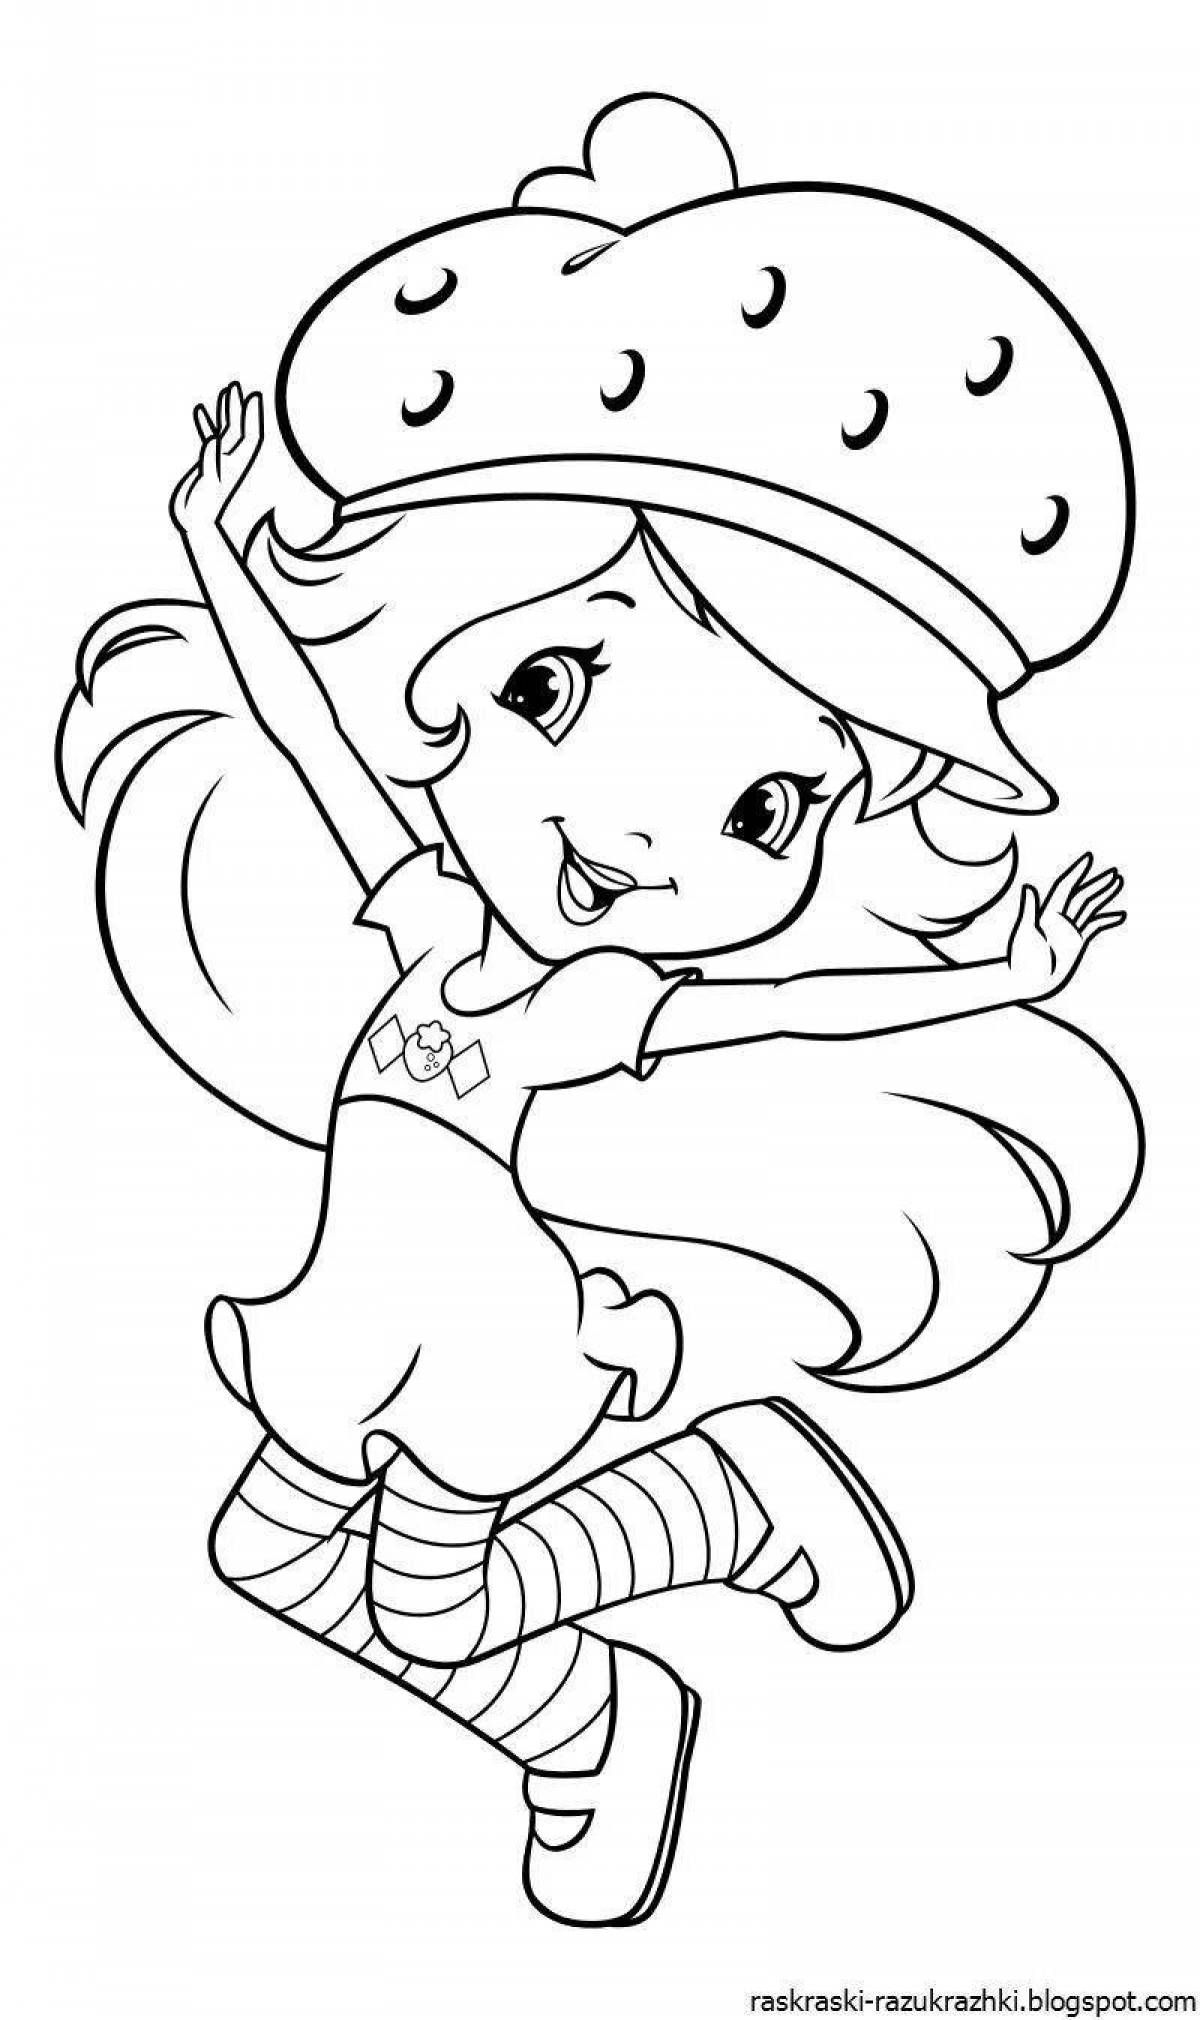 Coloring page playful crimson girl